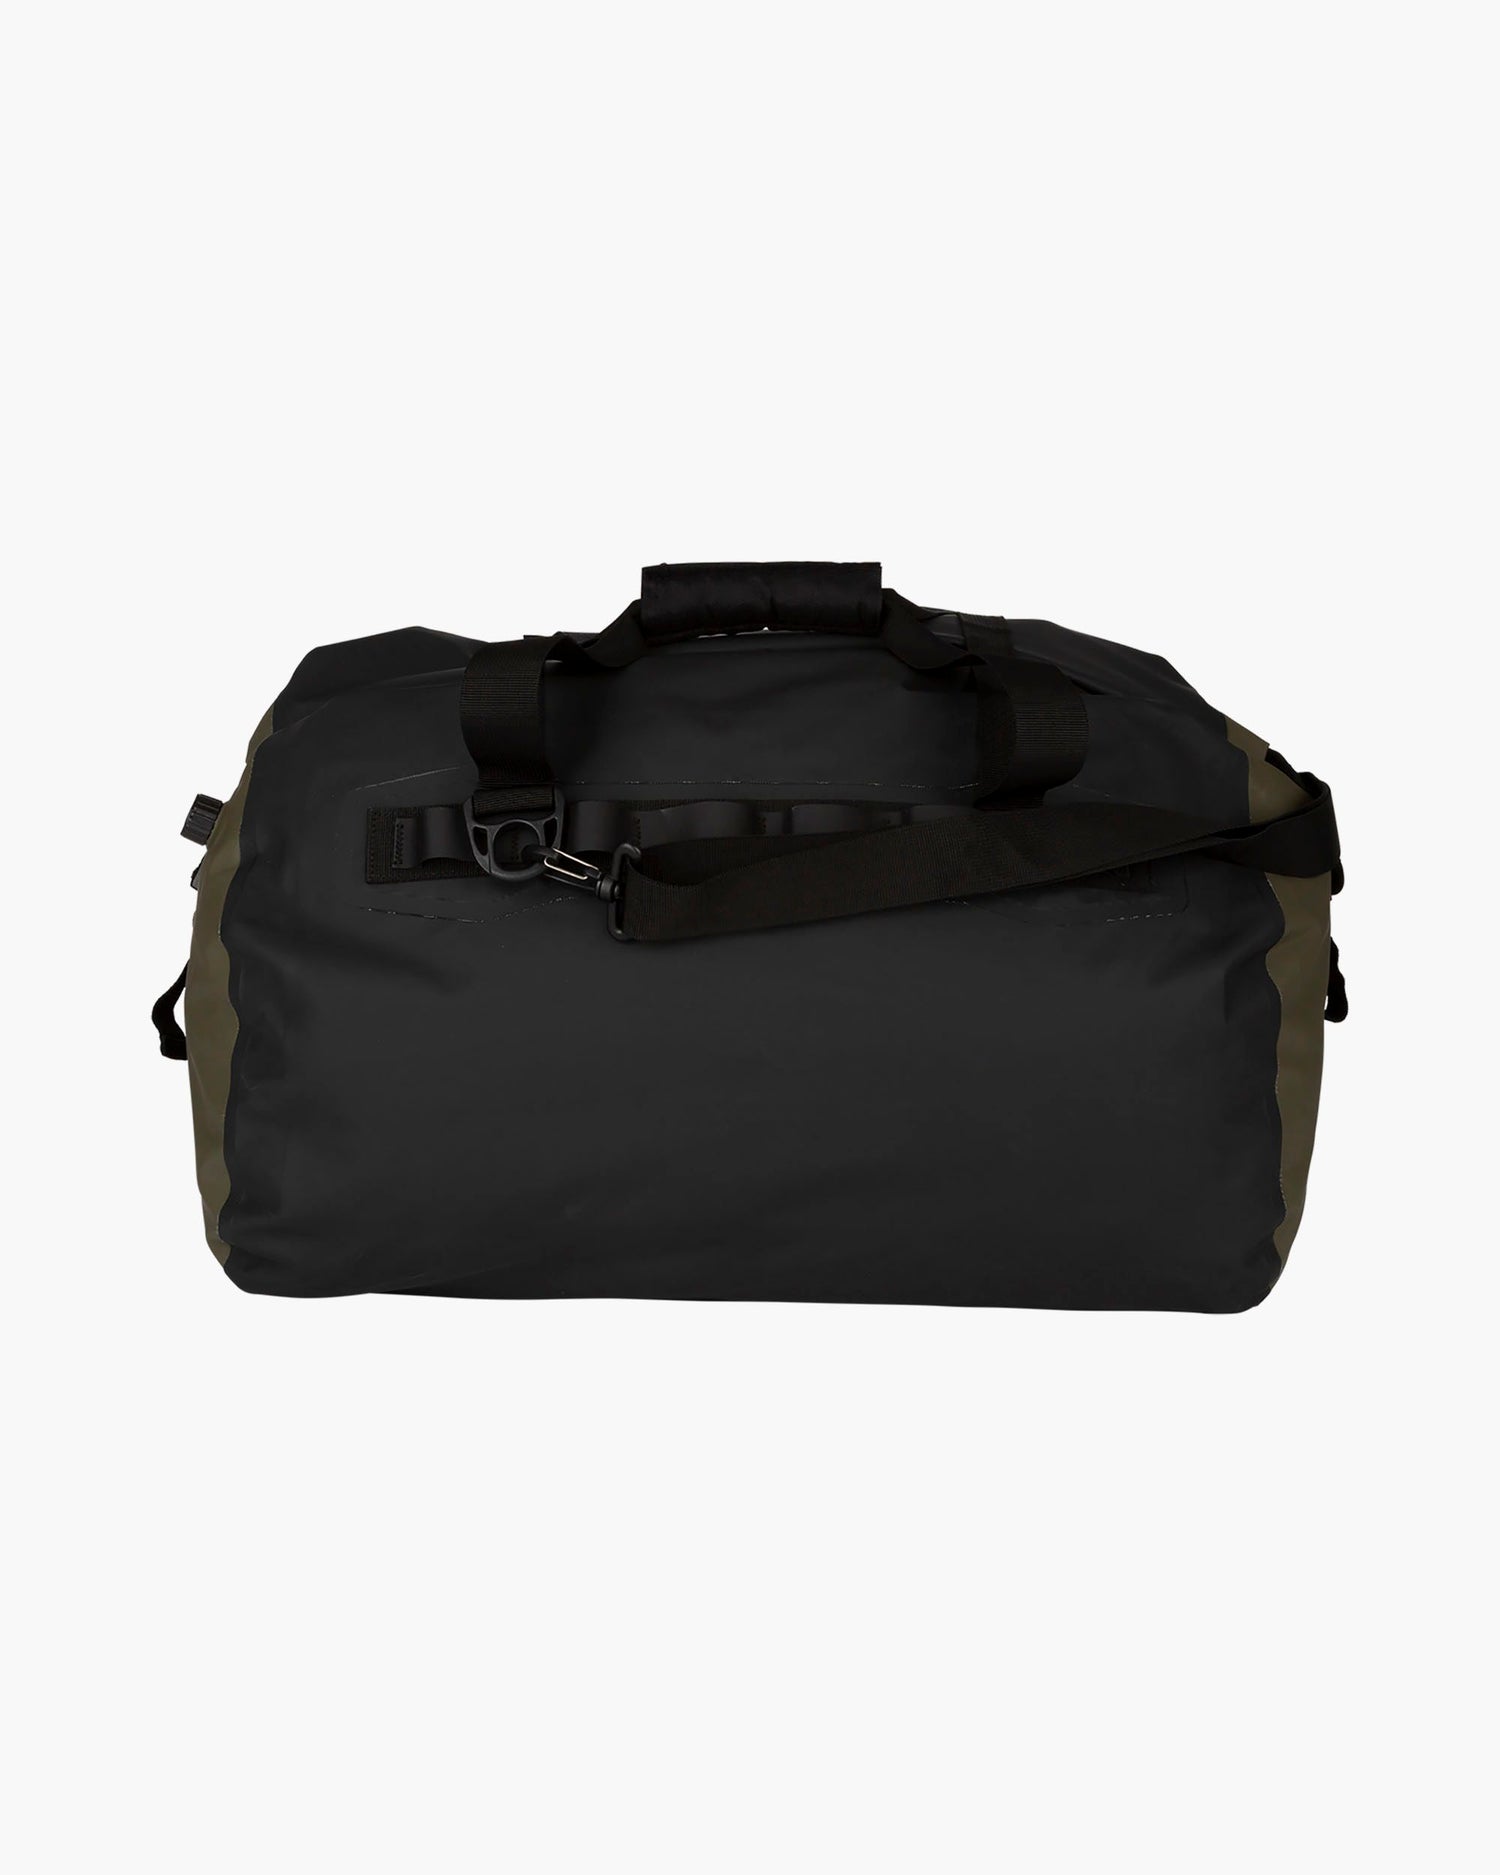 Profile of VOYAGER DUFFLE black/military